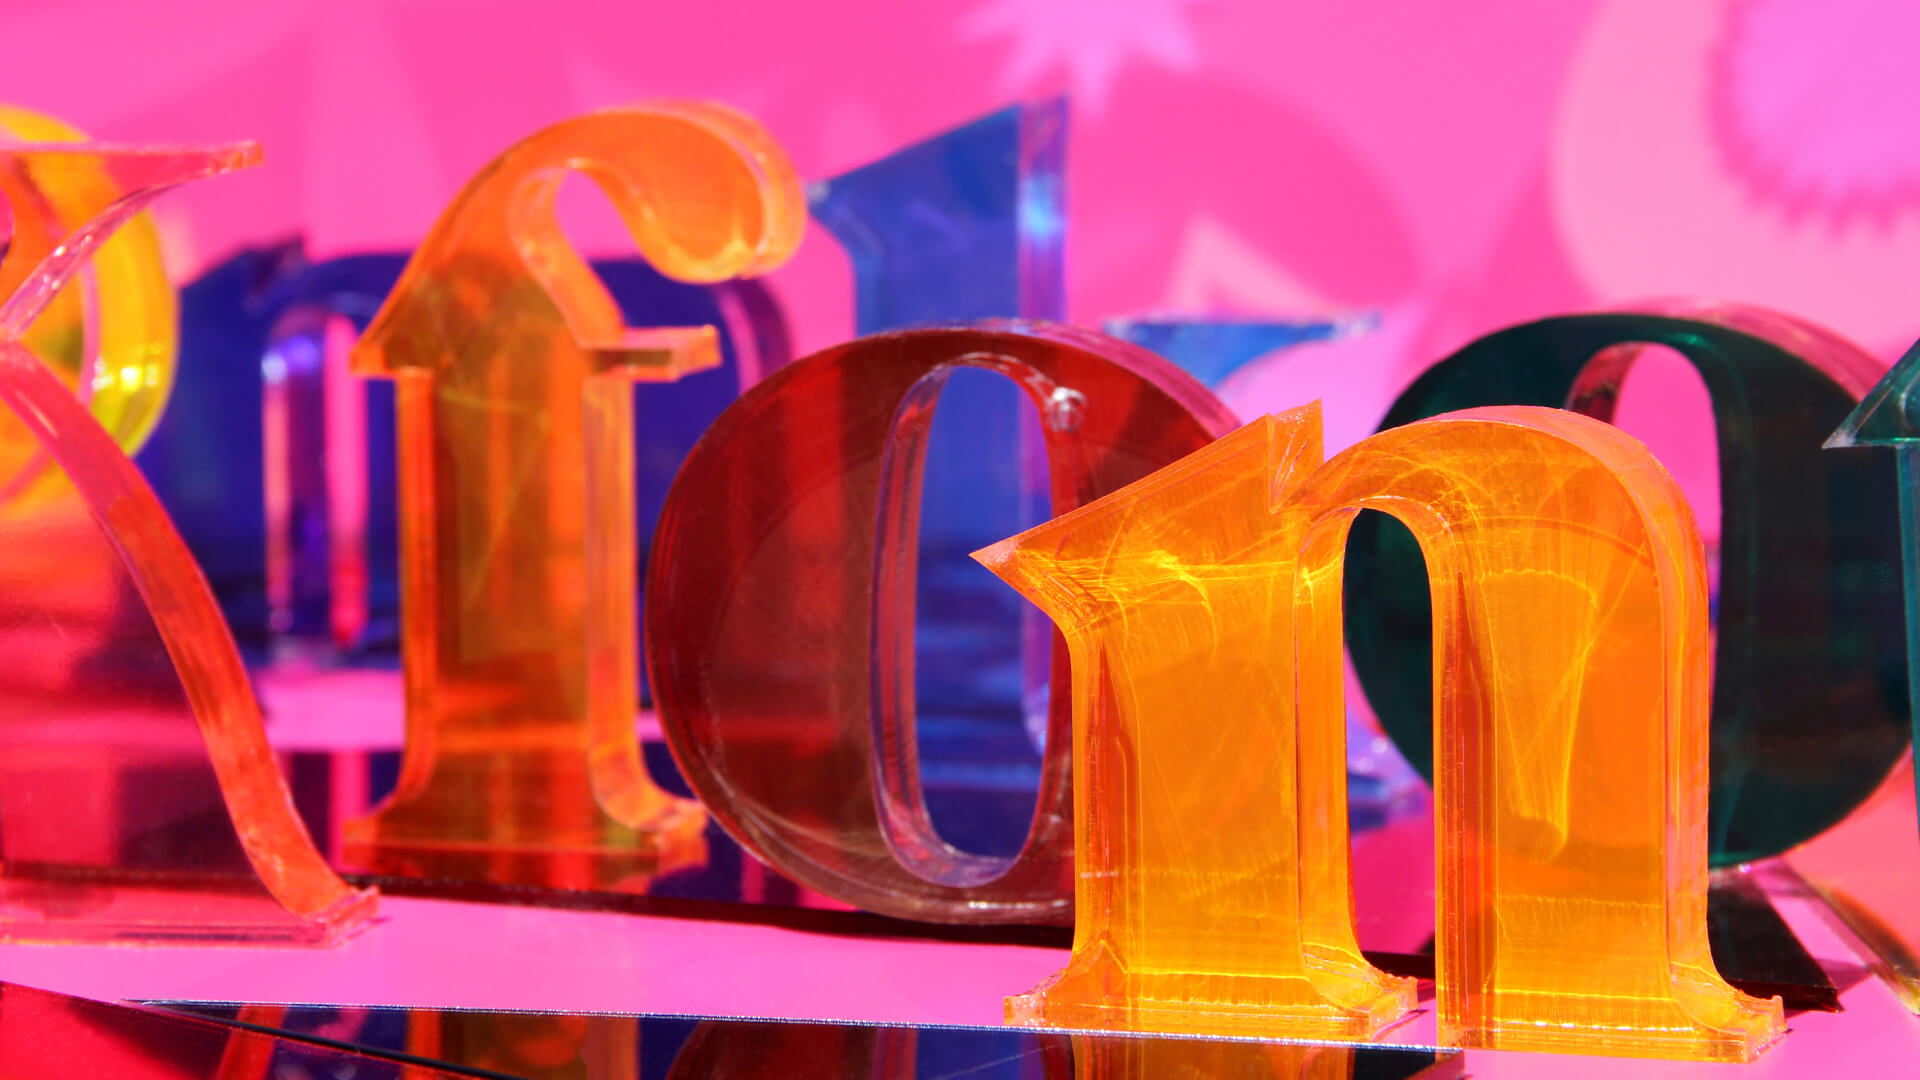 Letters future - letter-space-future-litres-coloured-litres-transparent-litres on a dewy background-litres-reflecting-litres-neon-litres-with-plexi